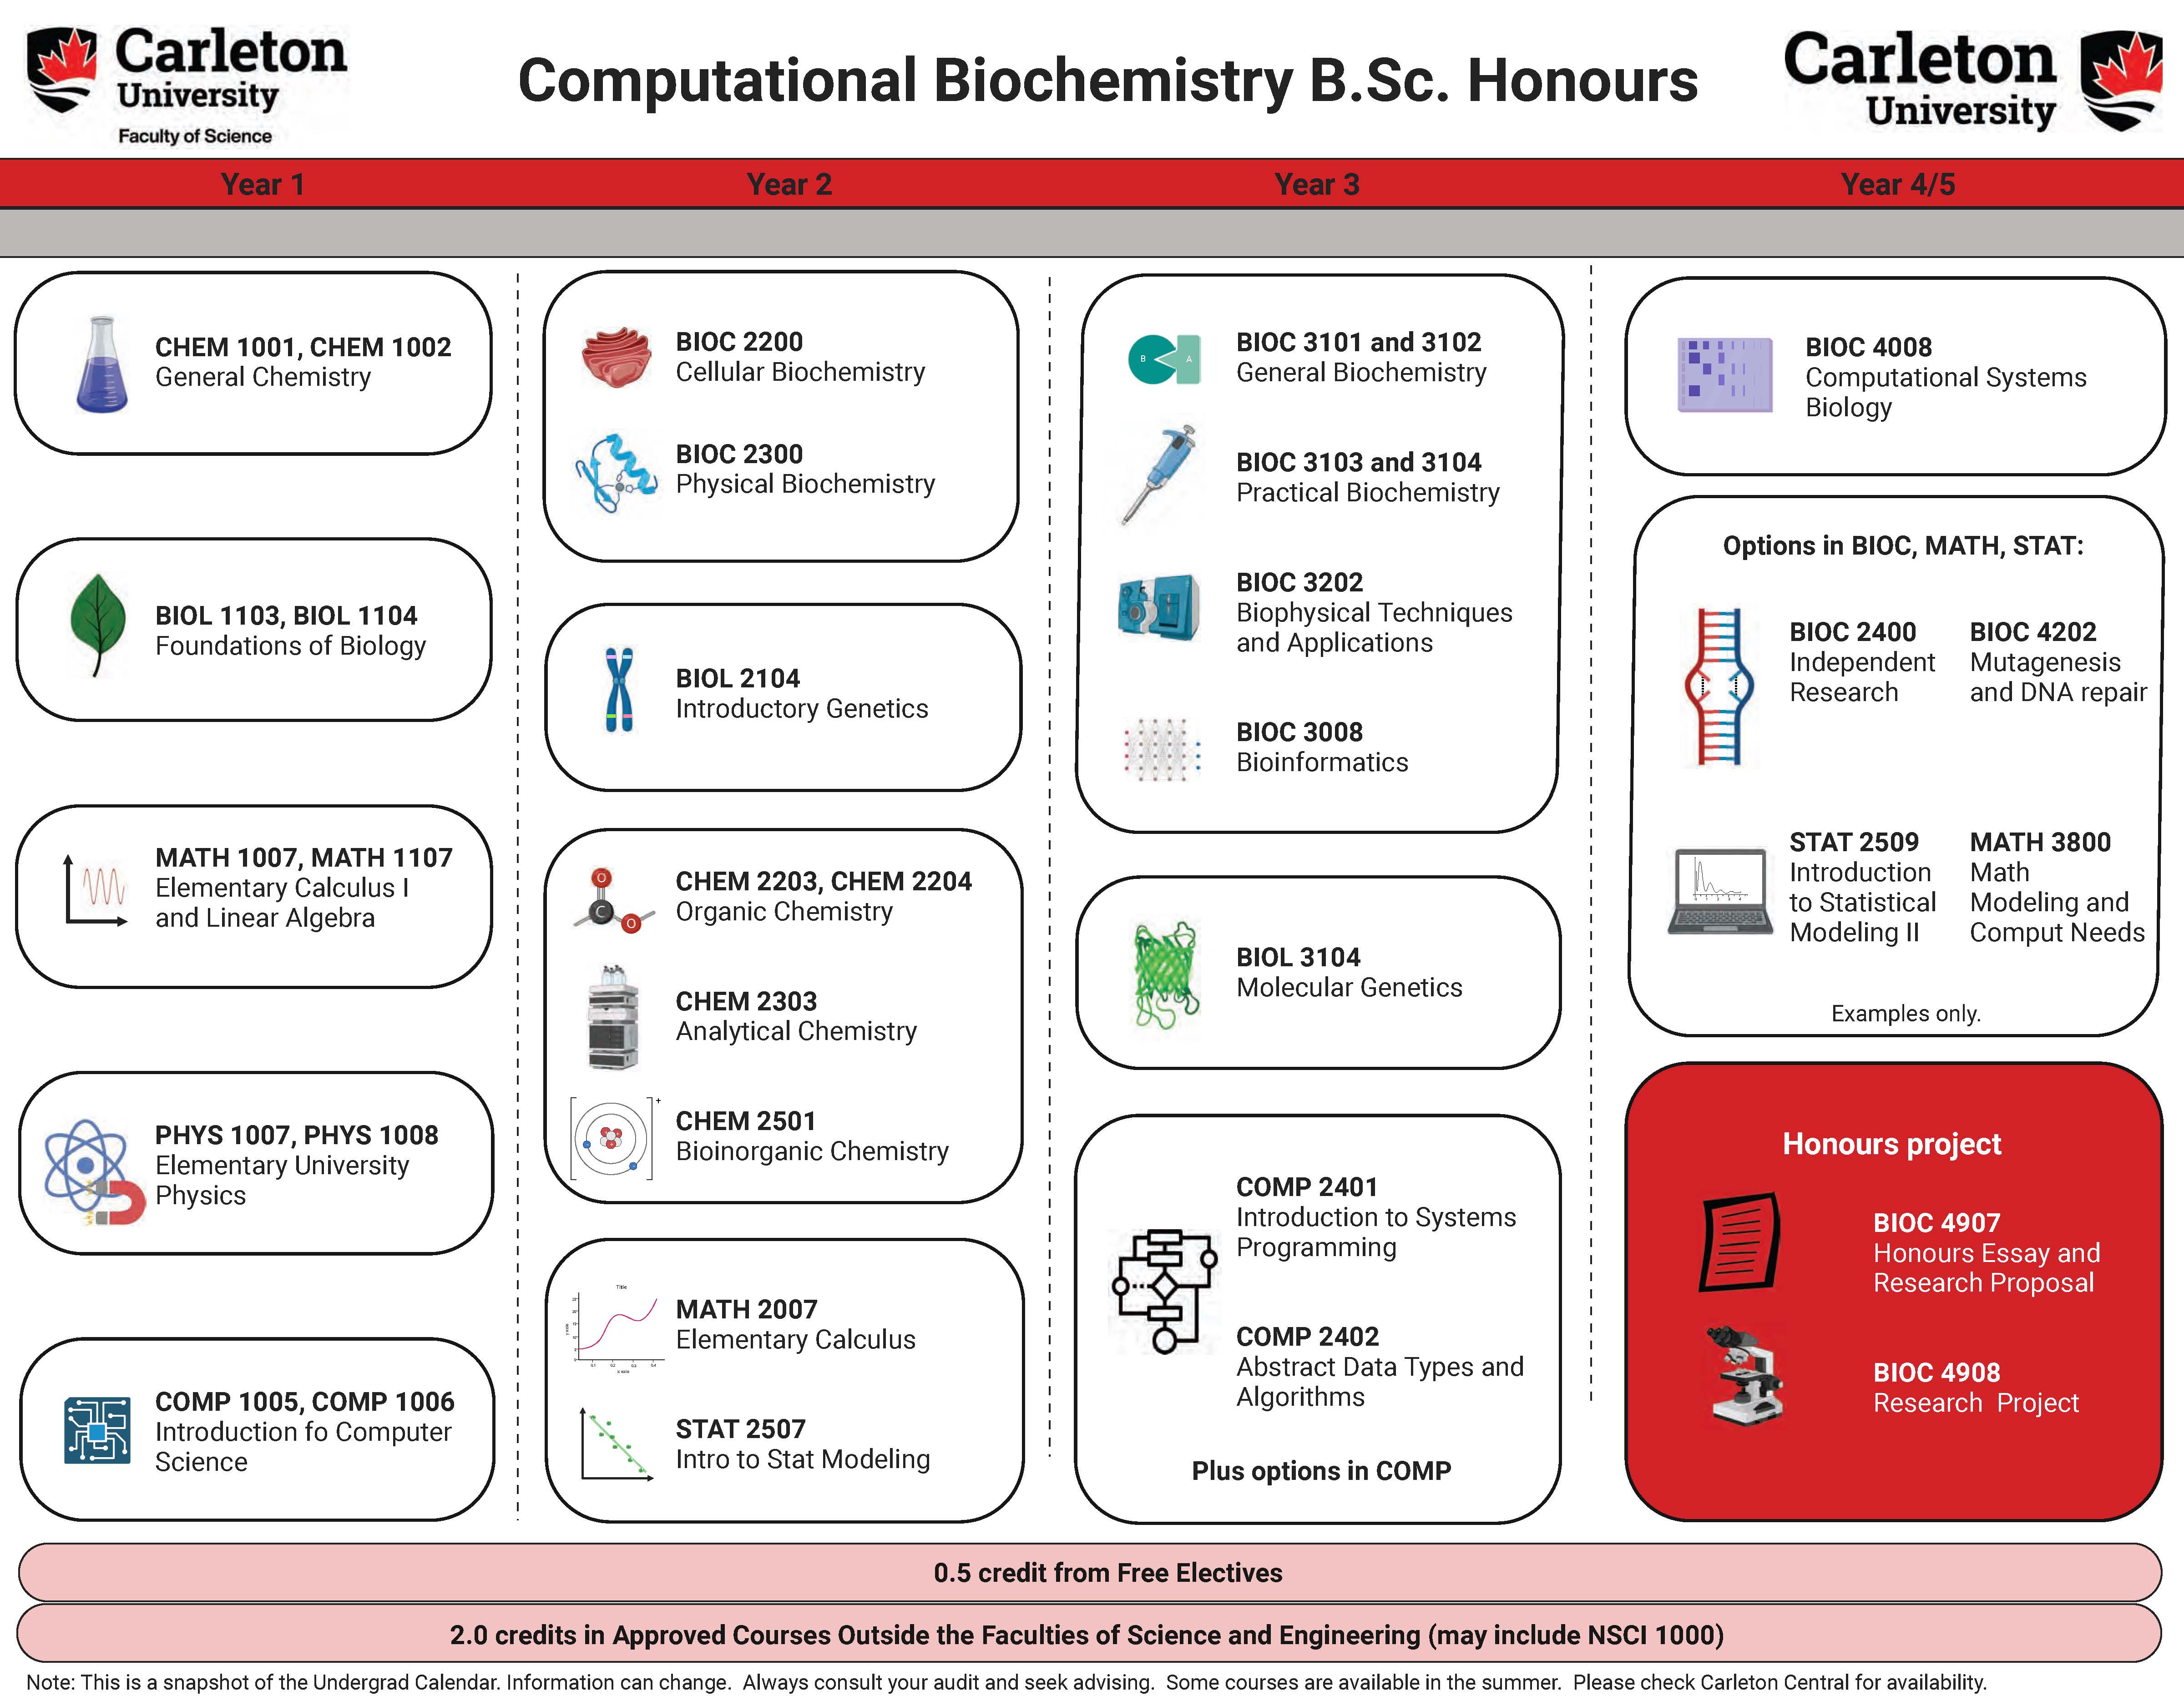 Course Map for Computational Biochemistry BSc. Honours.